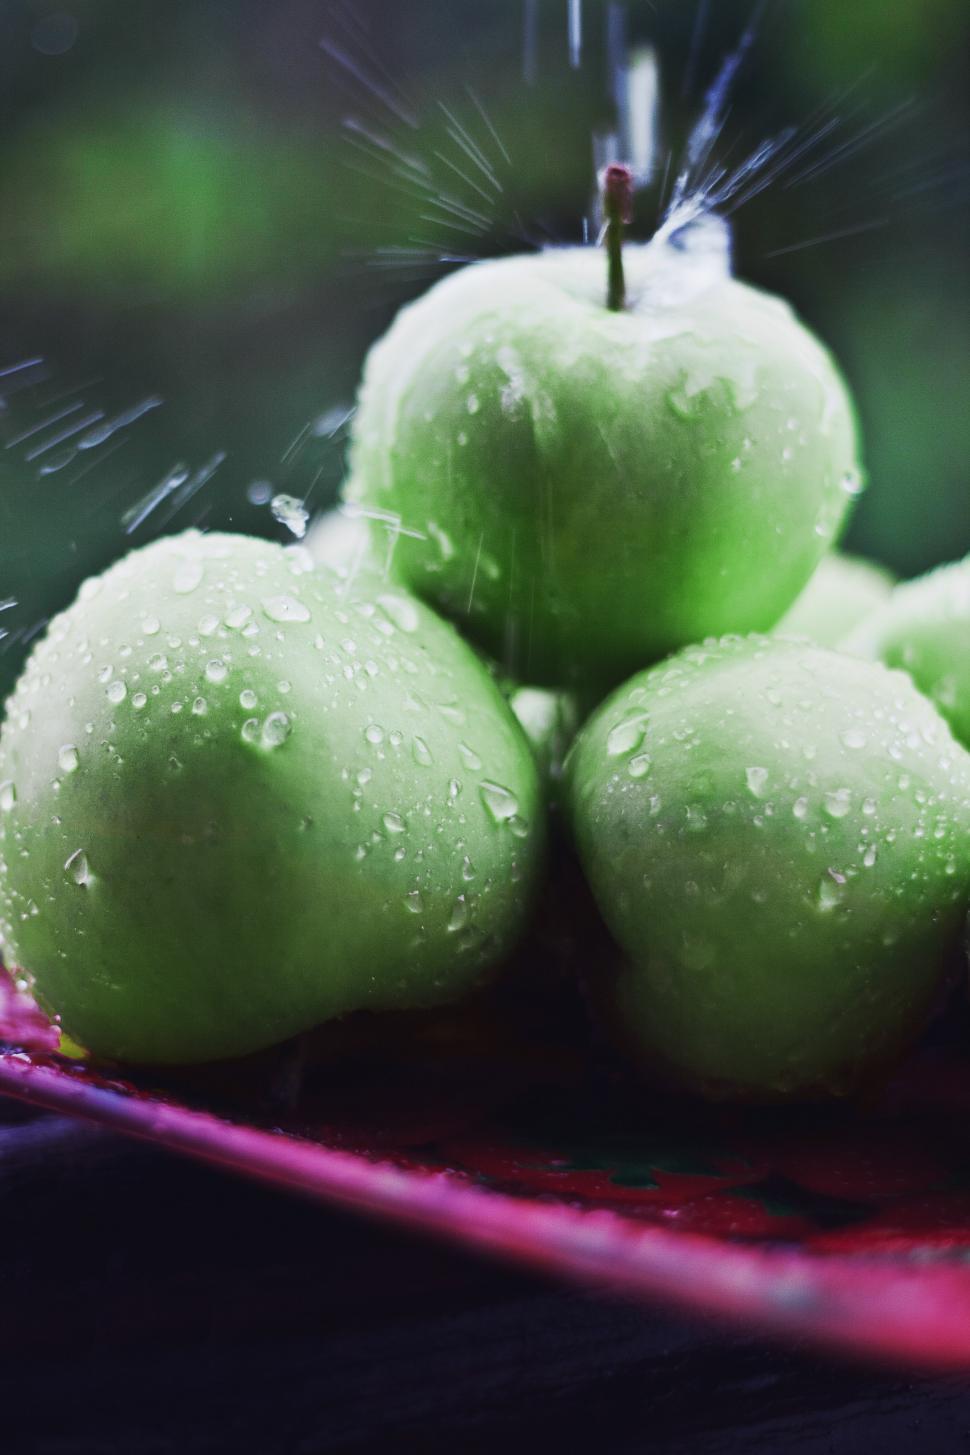 Free Image of Group of Green Apples on Red Cloth 